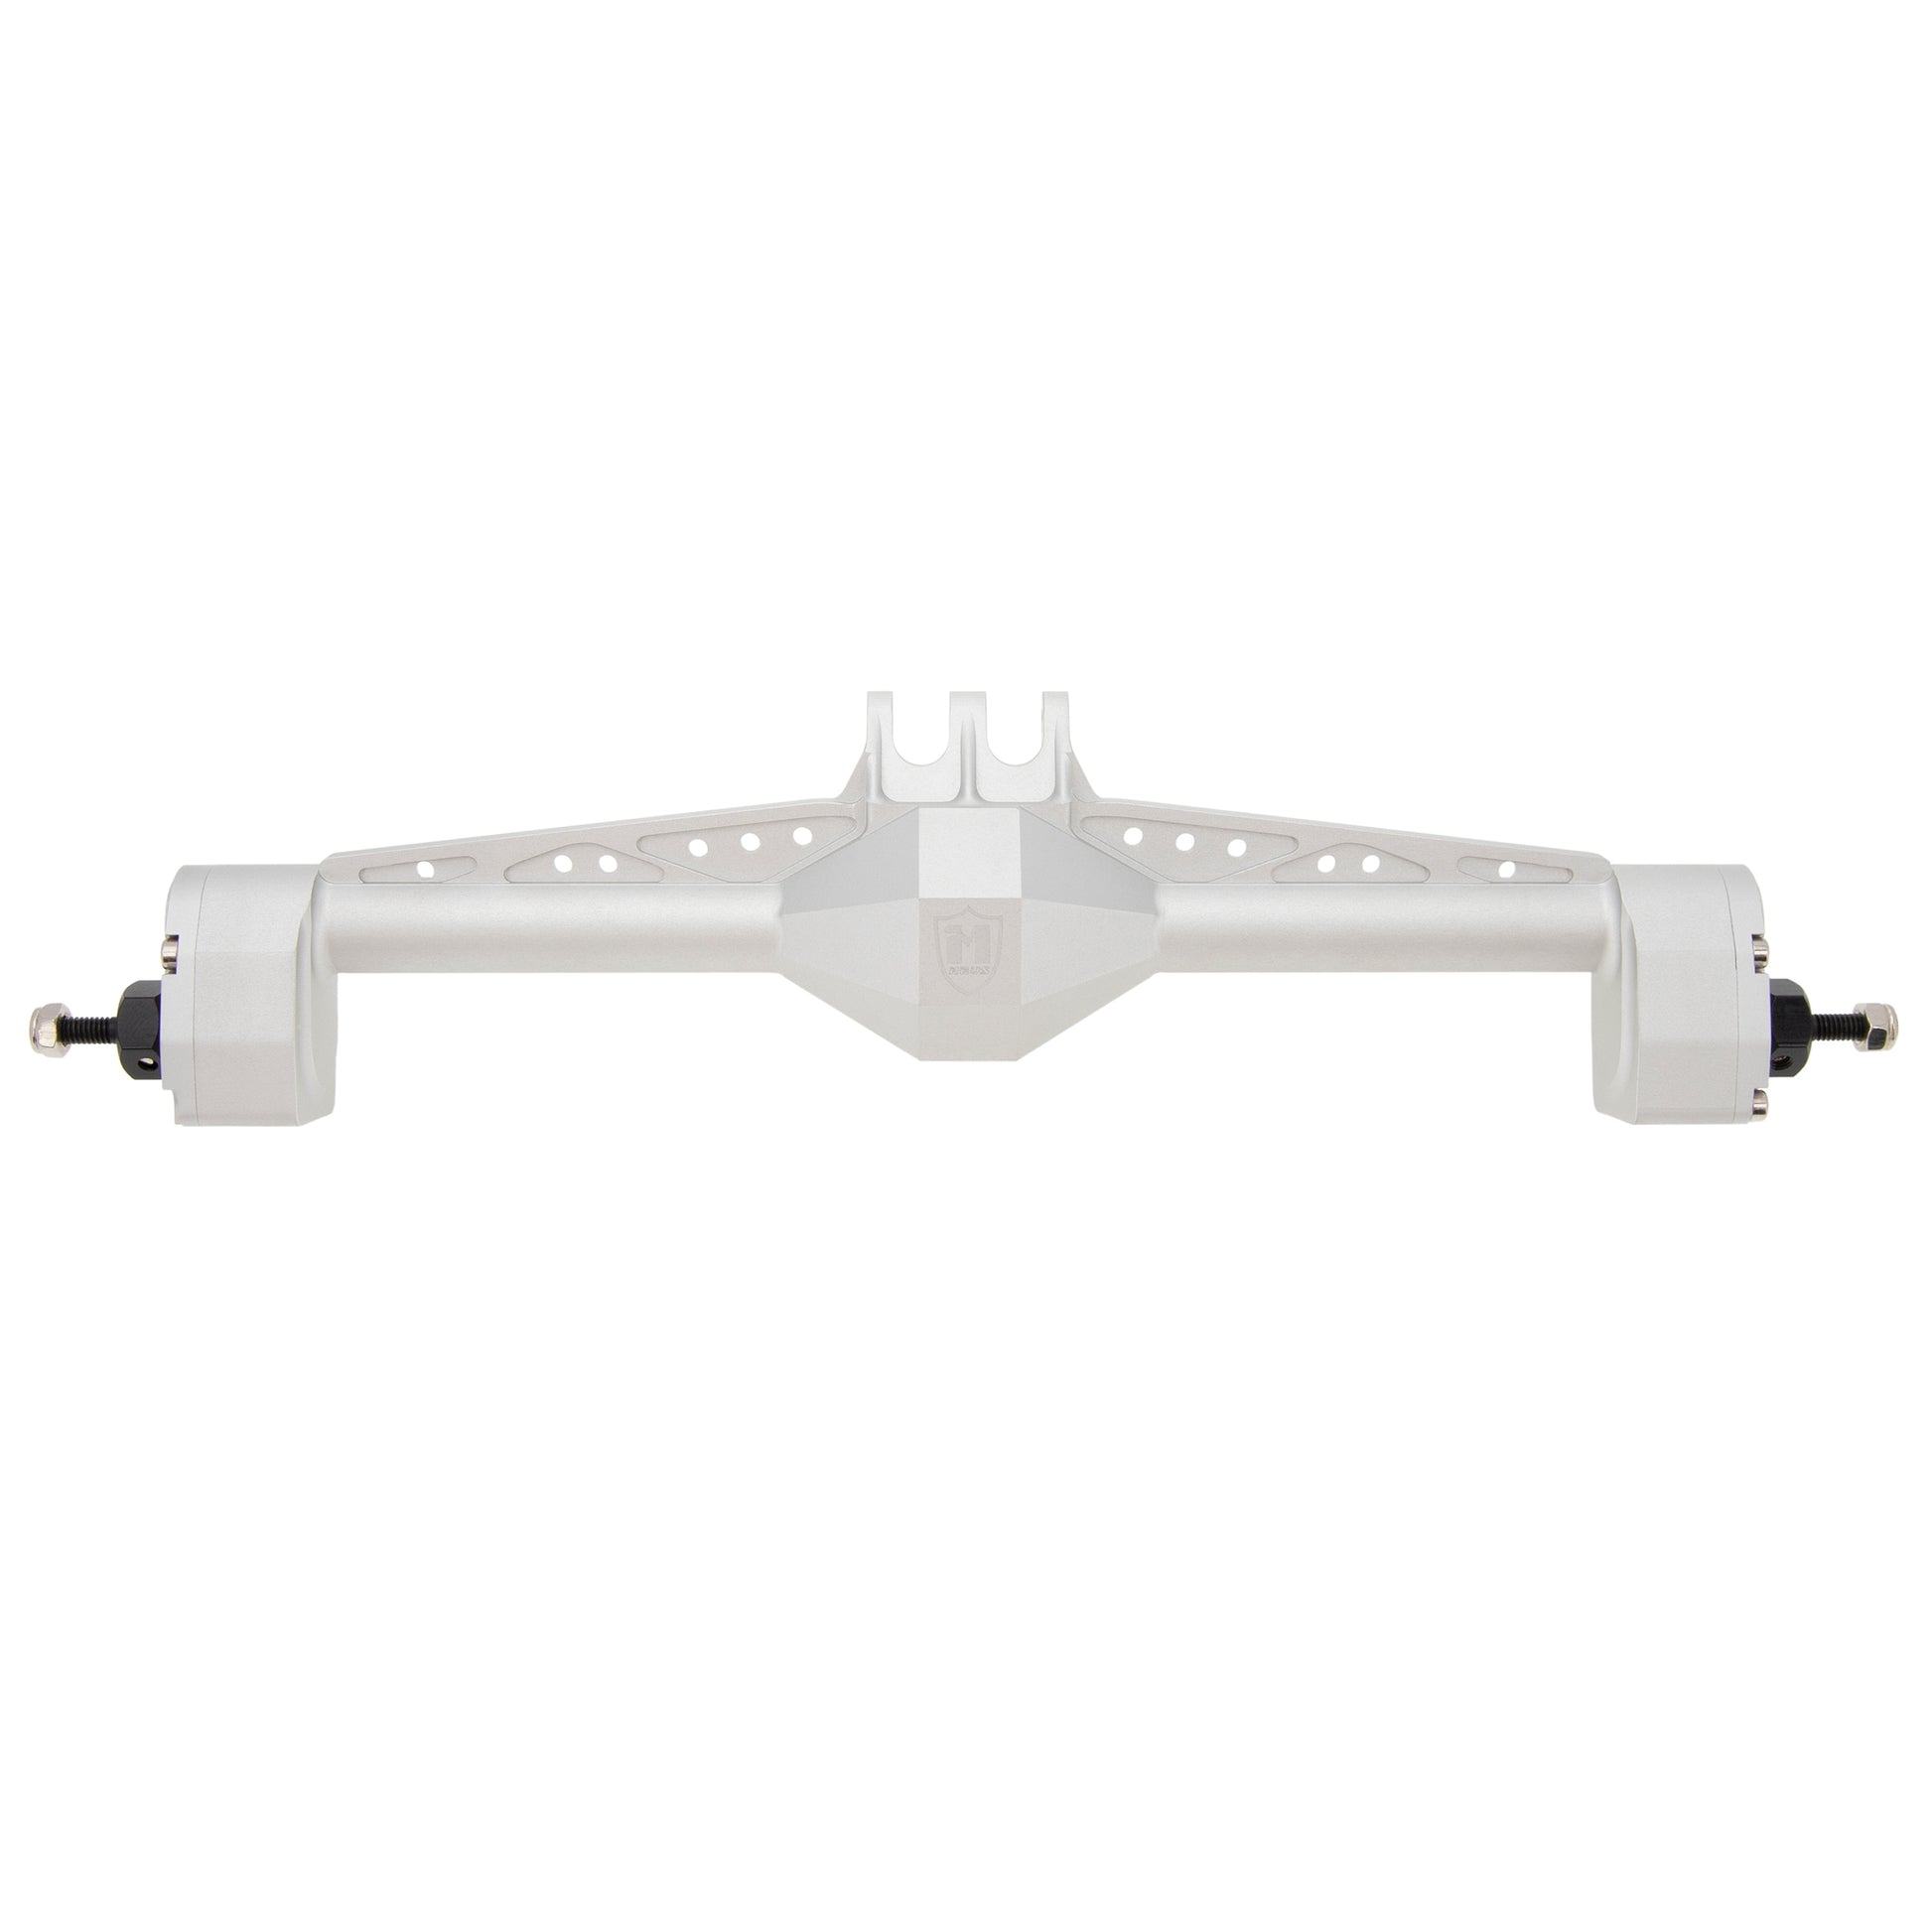 Silver Rear Isokinetic 3 section axles for Capra UTB